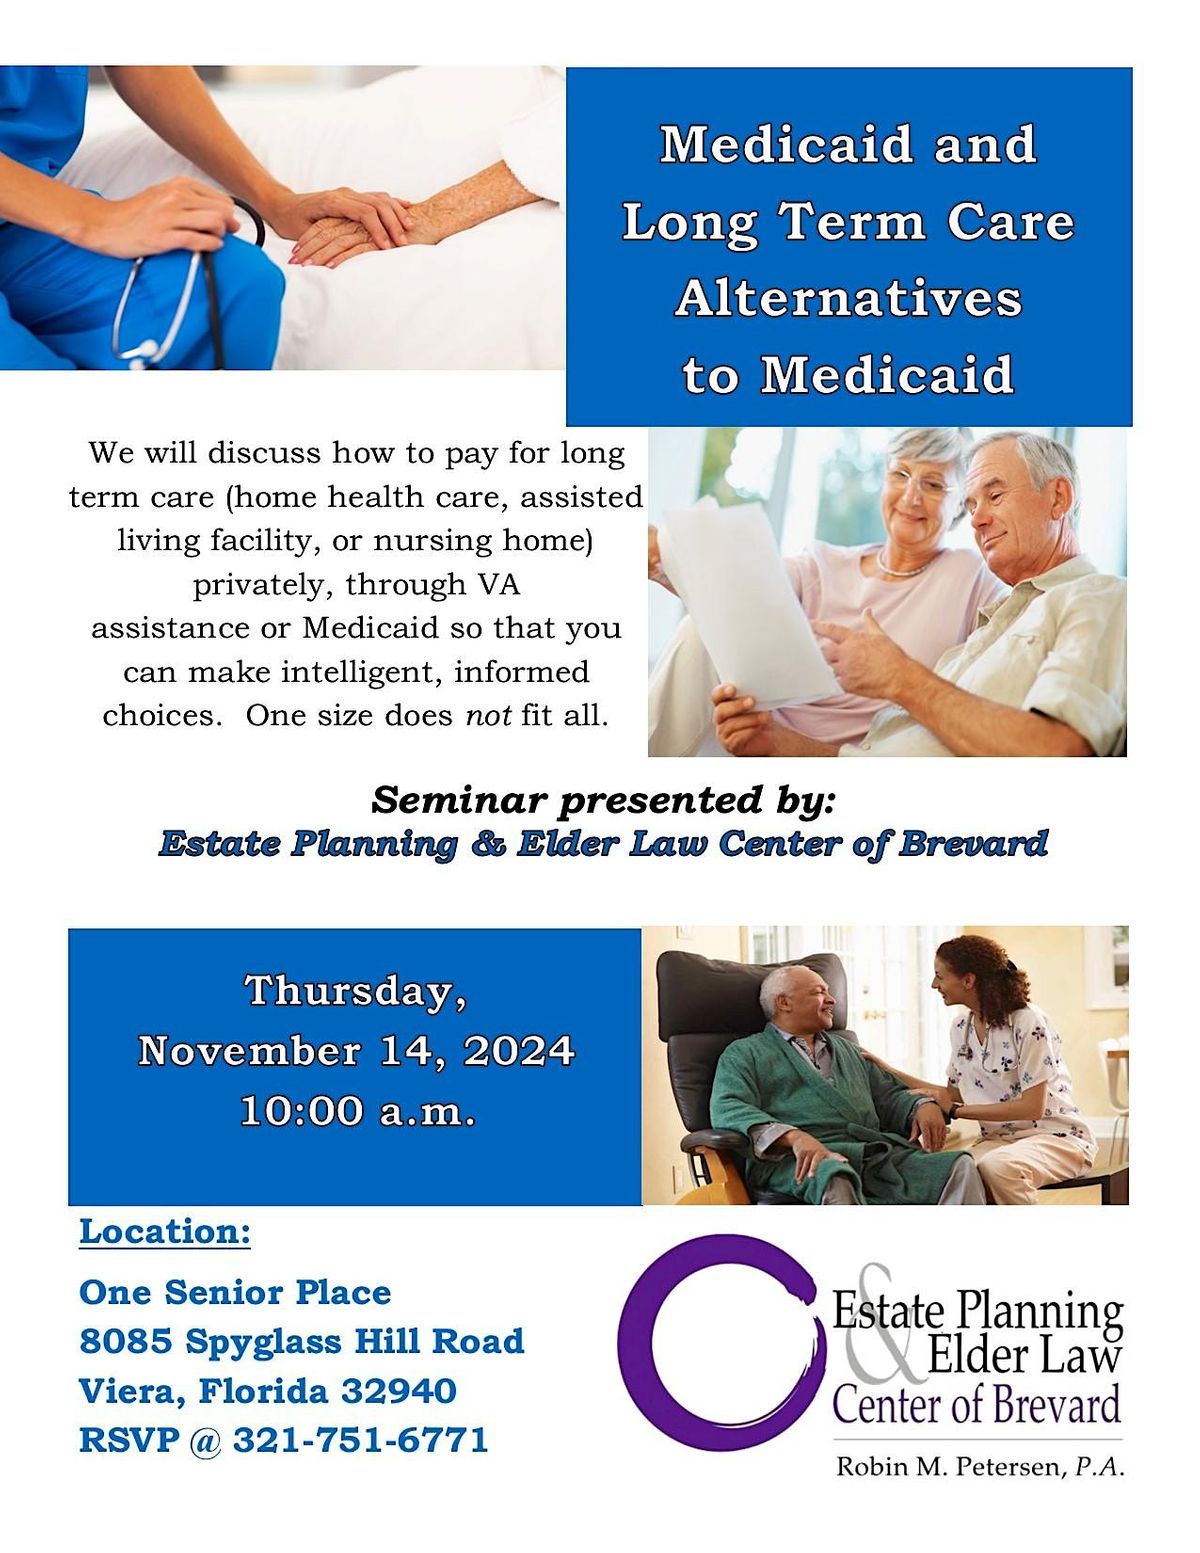 Medicaid and Long Term Care Alternative to Medicaid